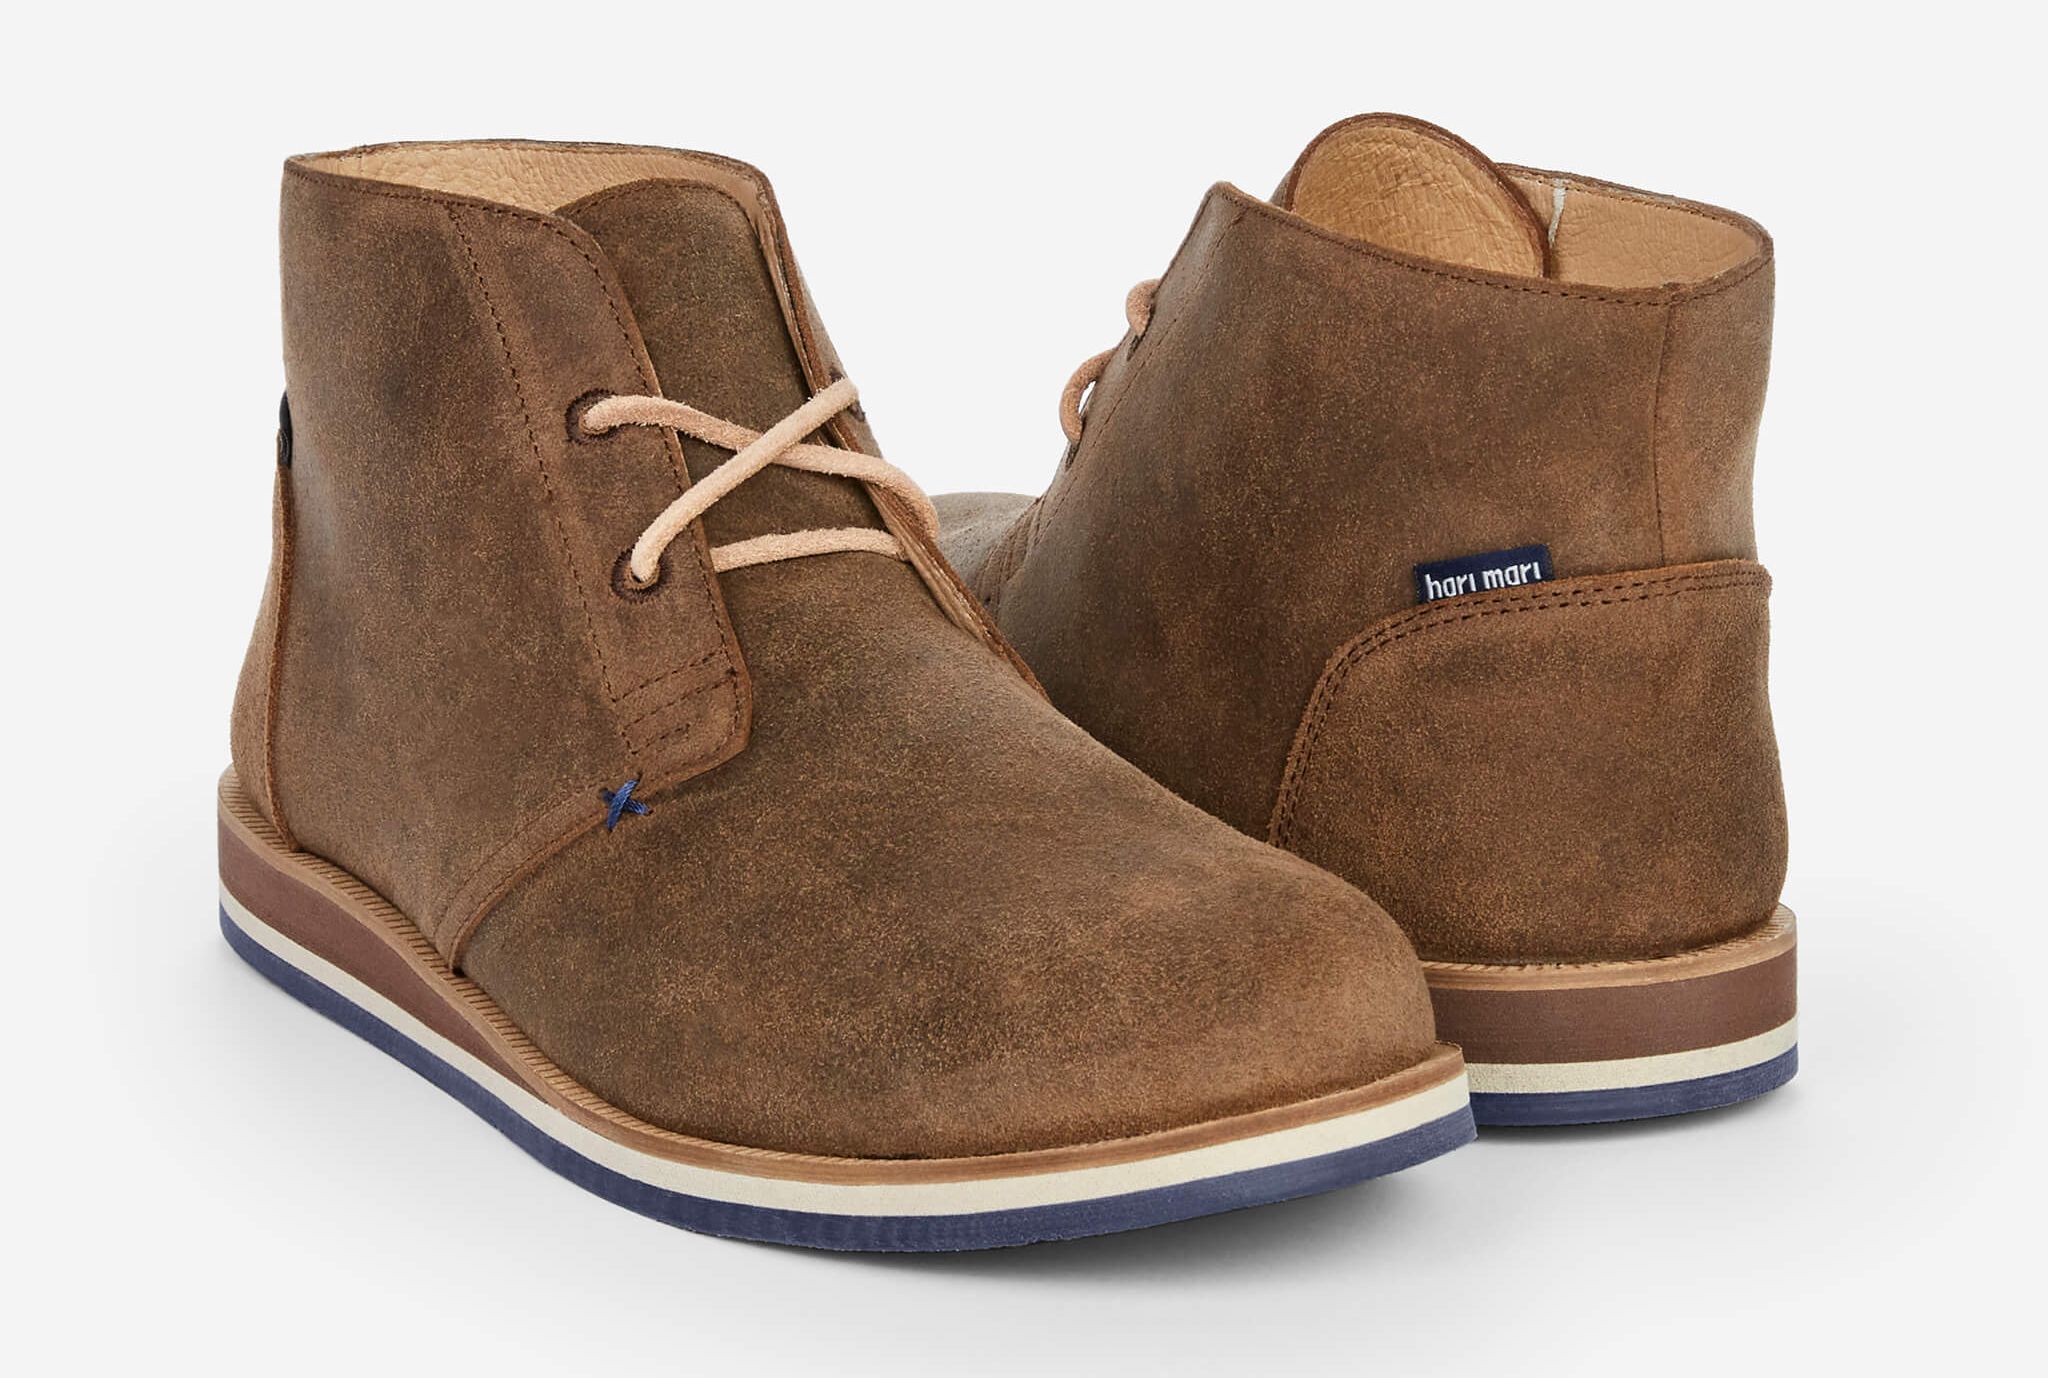 Two brown lace-up chukka boots with blue soles